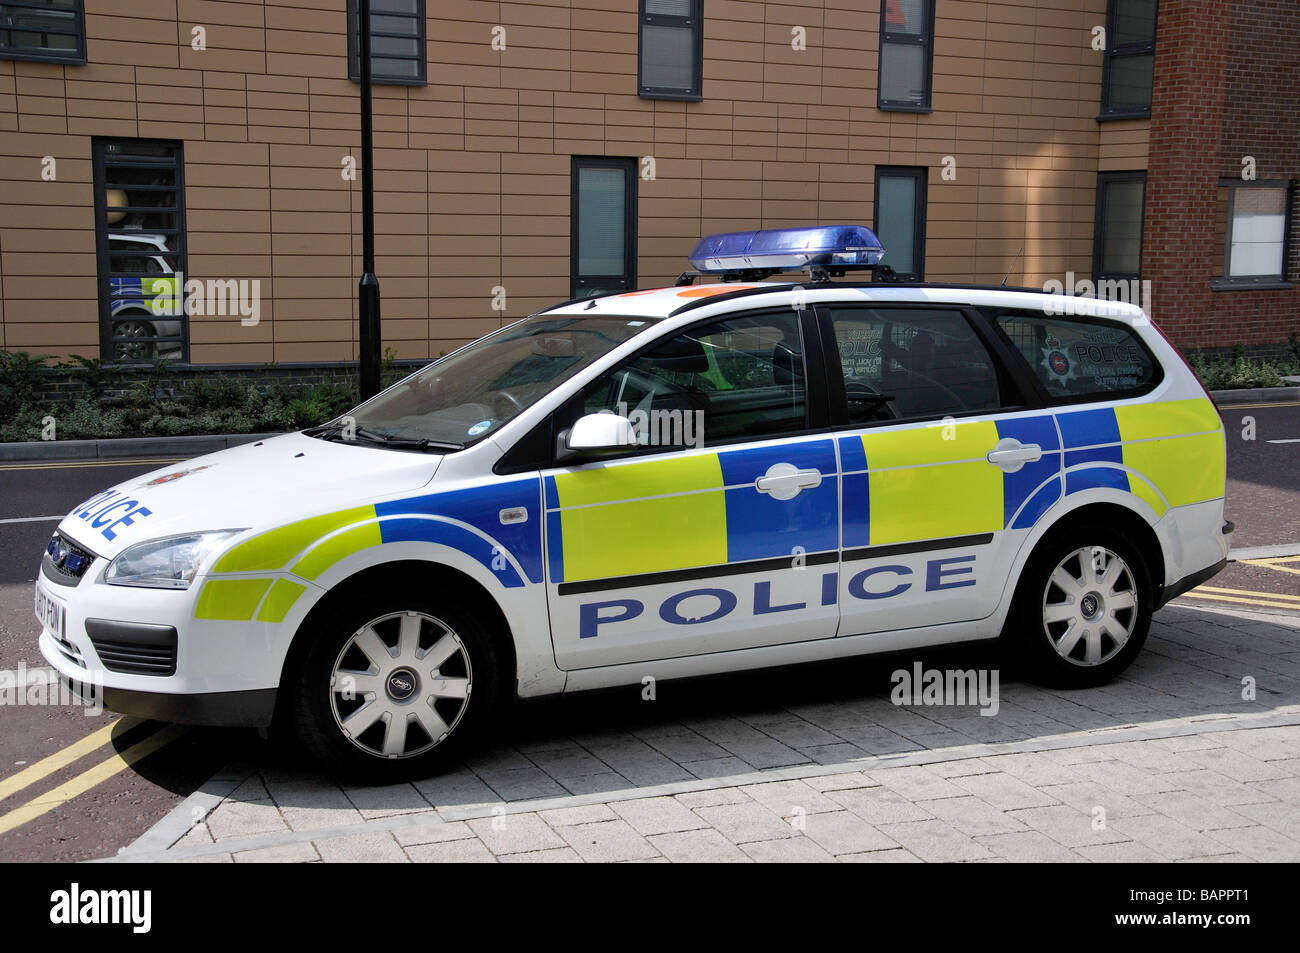 Voiture de police, Camberley, Surrey, Angleterre, Royaume-Uni Banque D'Images